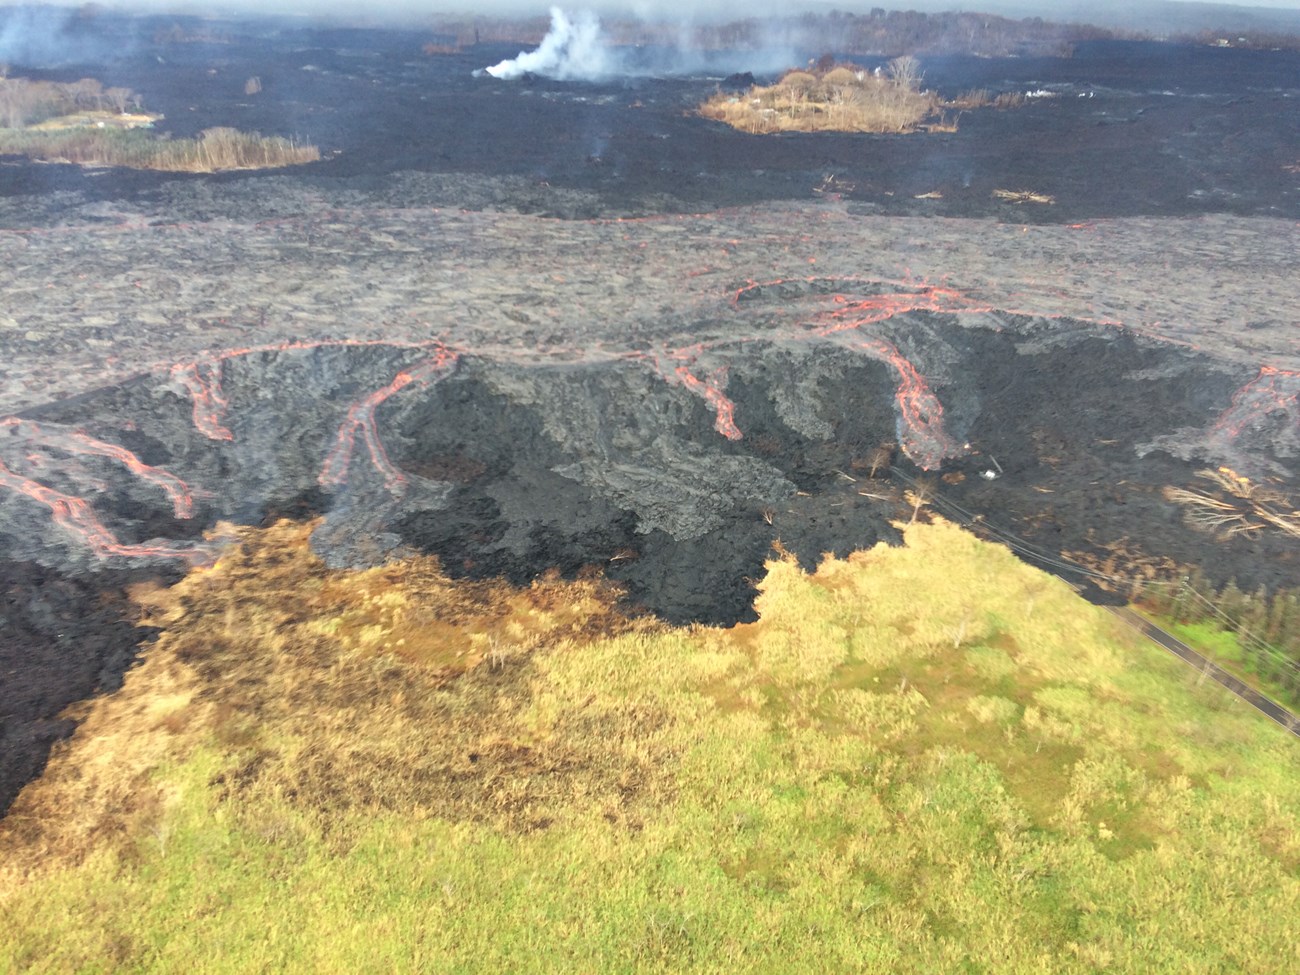 photo of a volcanic landscape with active lava flows and a steaming vent in the distance